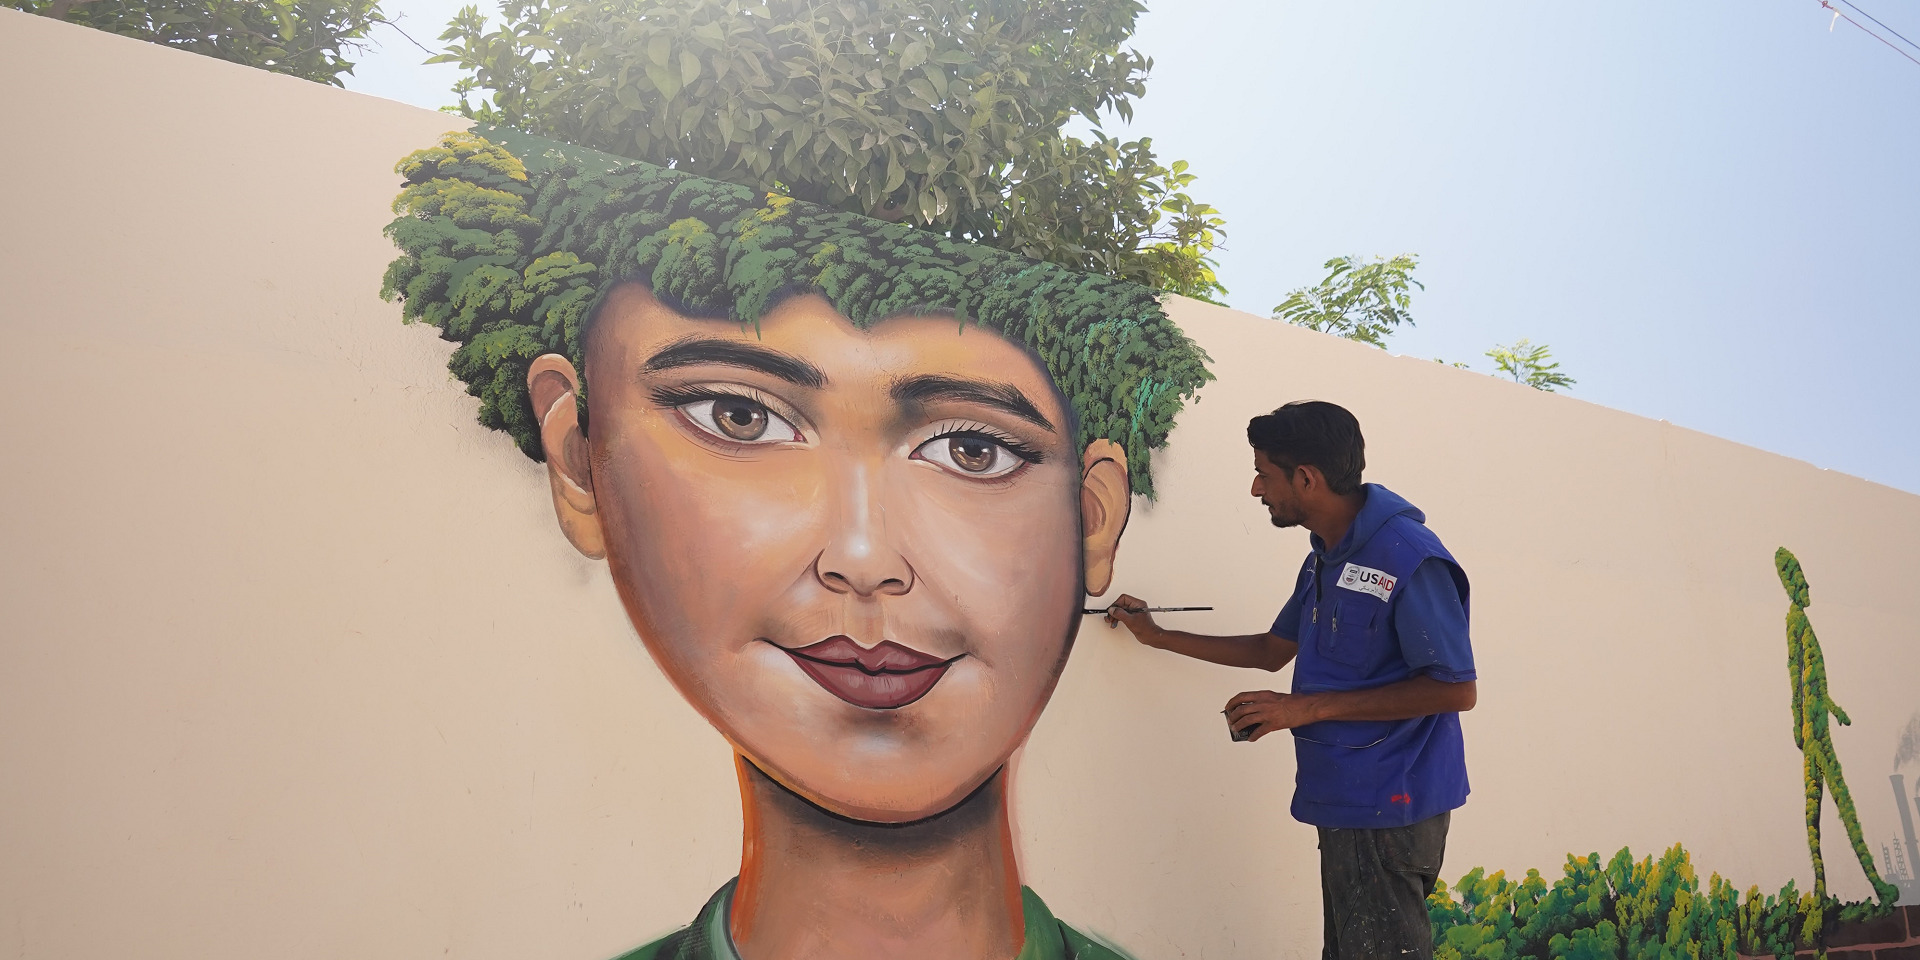 A man paints a mural of a woman's face with leaves for hair.